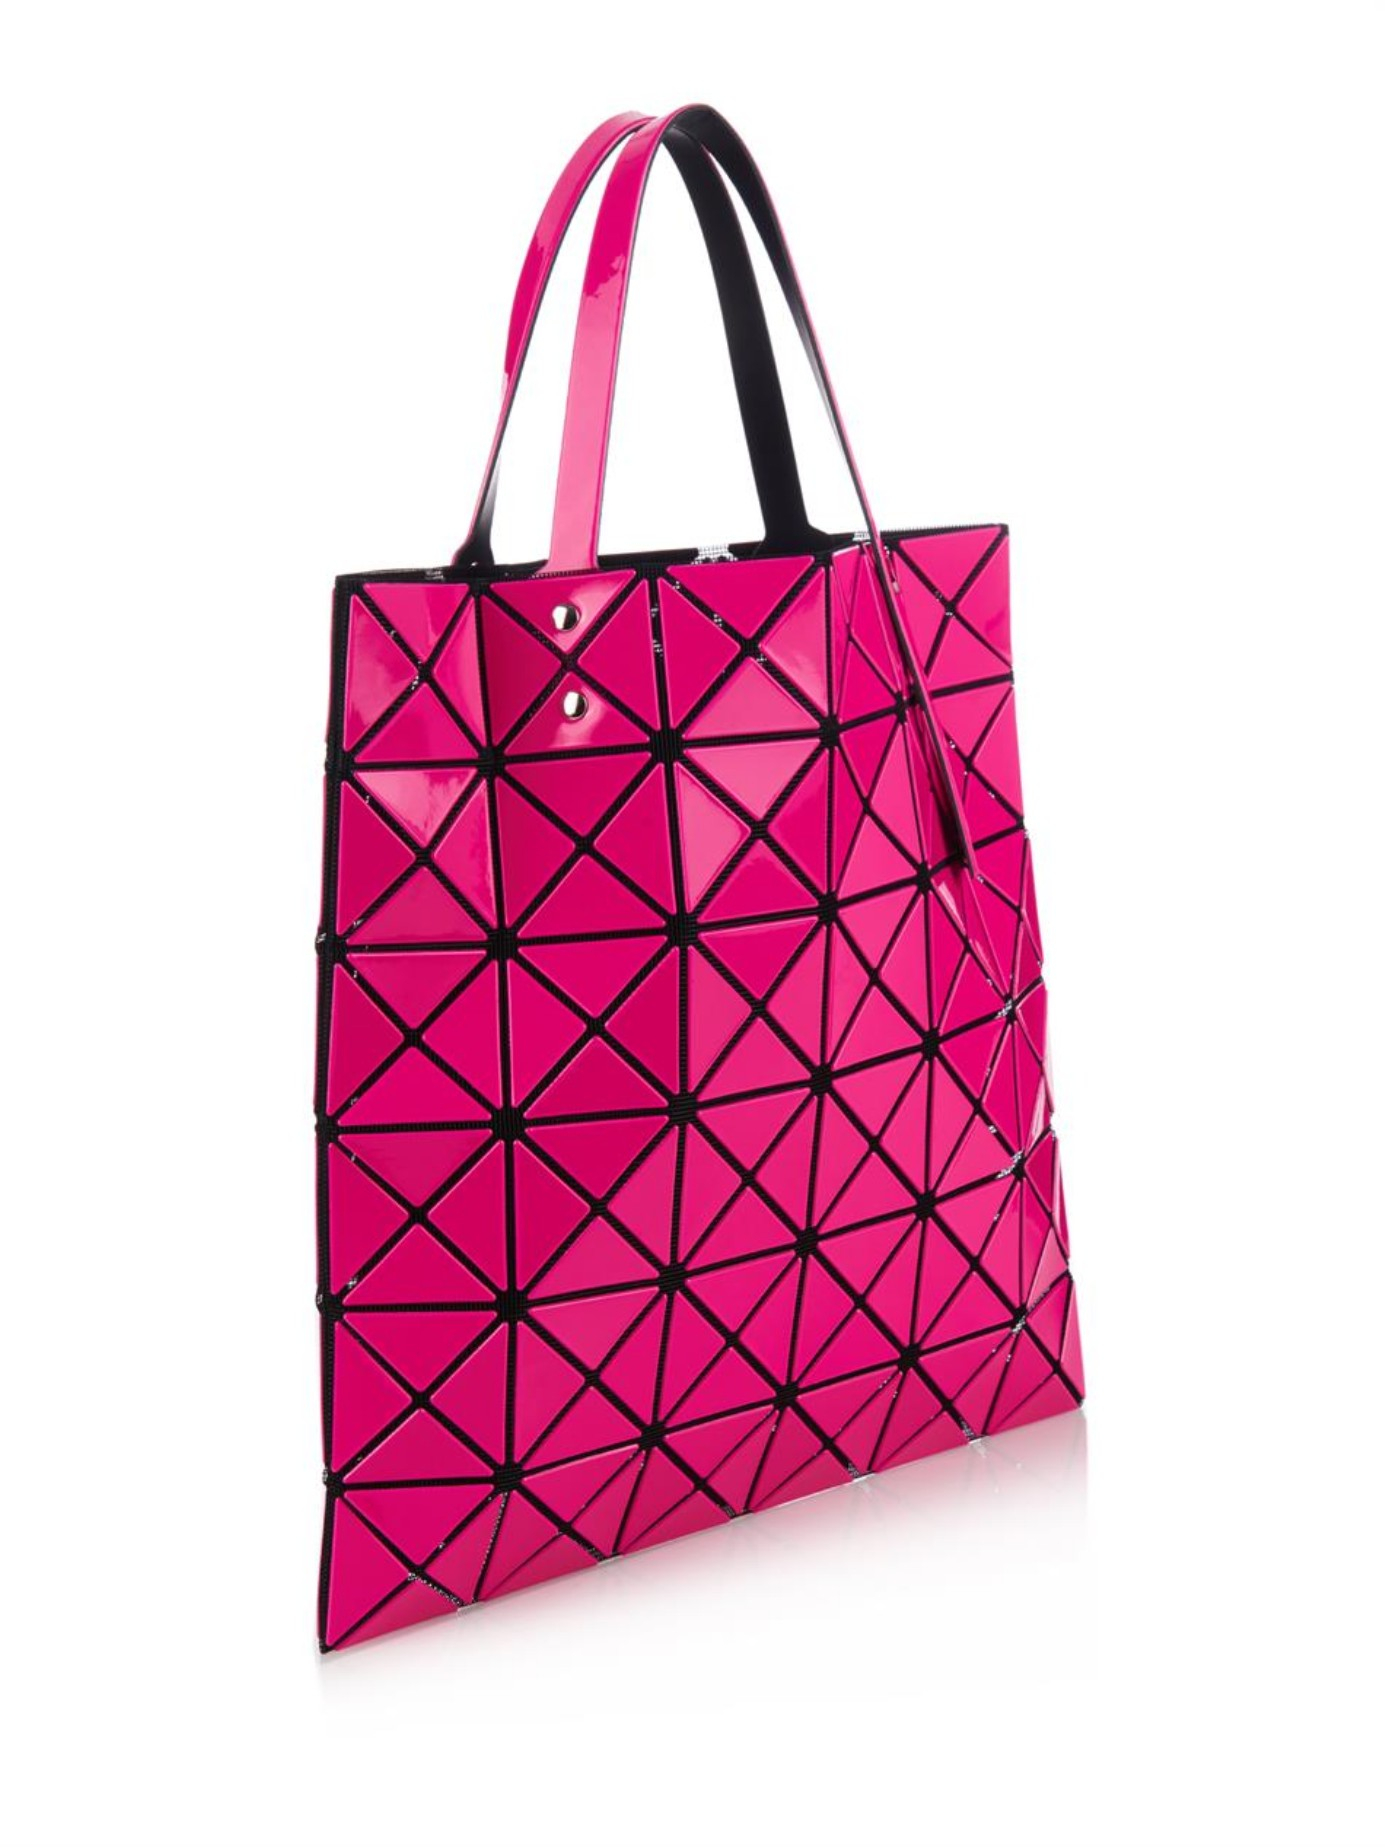 Bao Bao Issey Miyake Lucent-1 Tote in Pink - Lyst